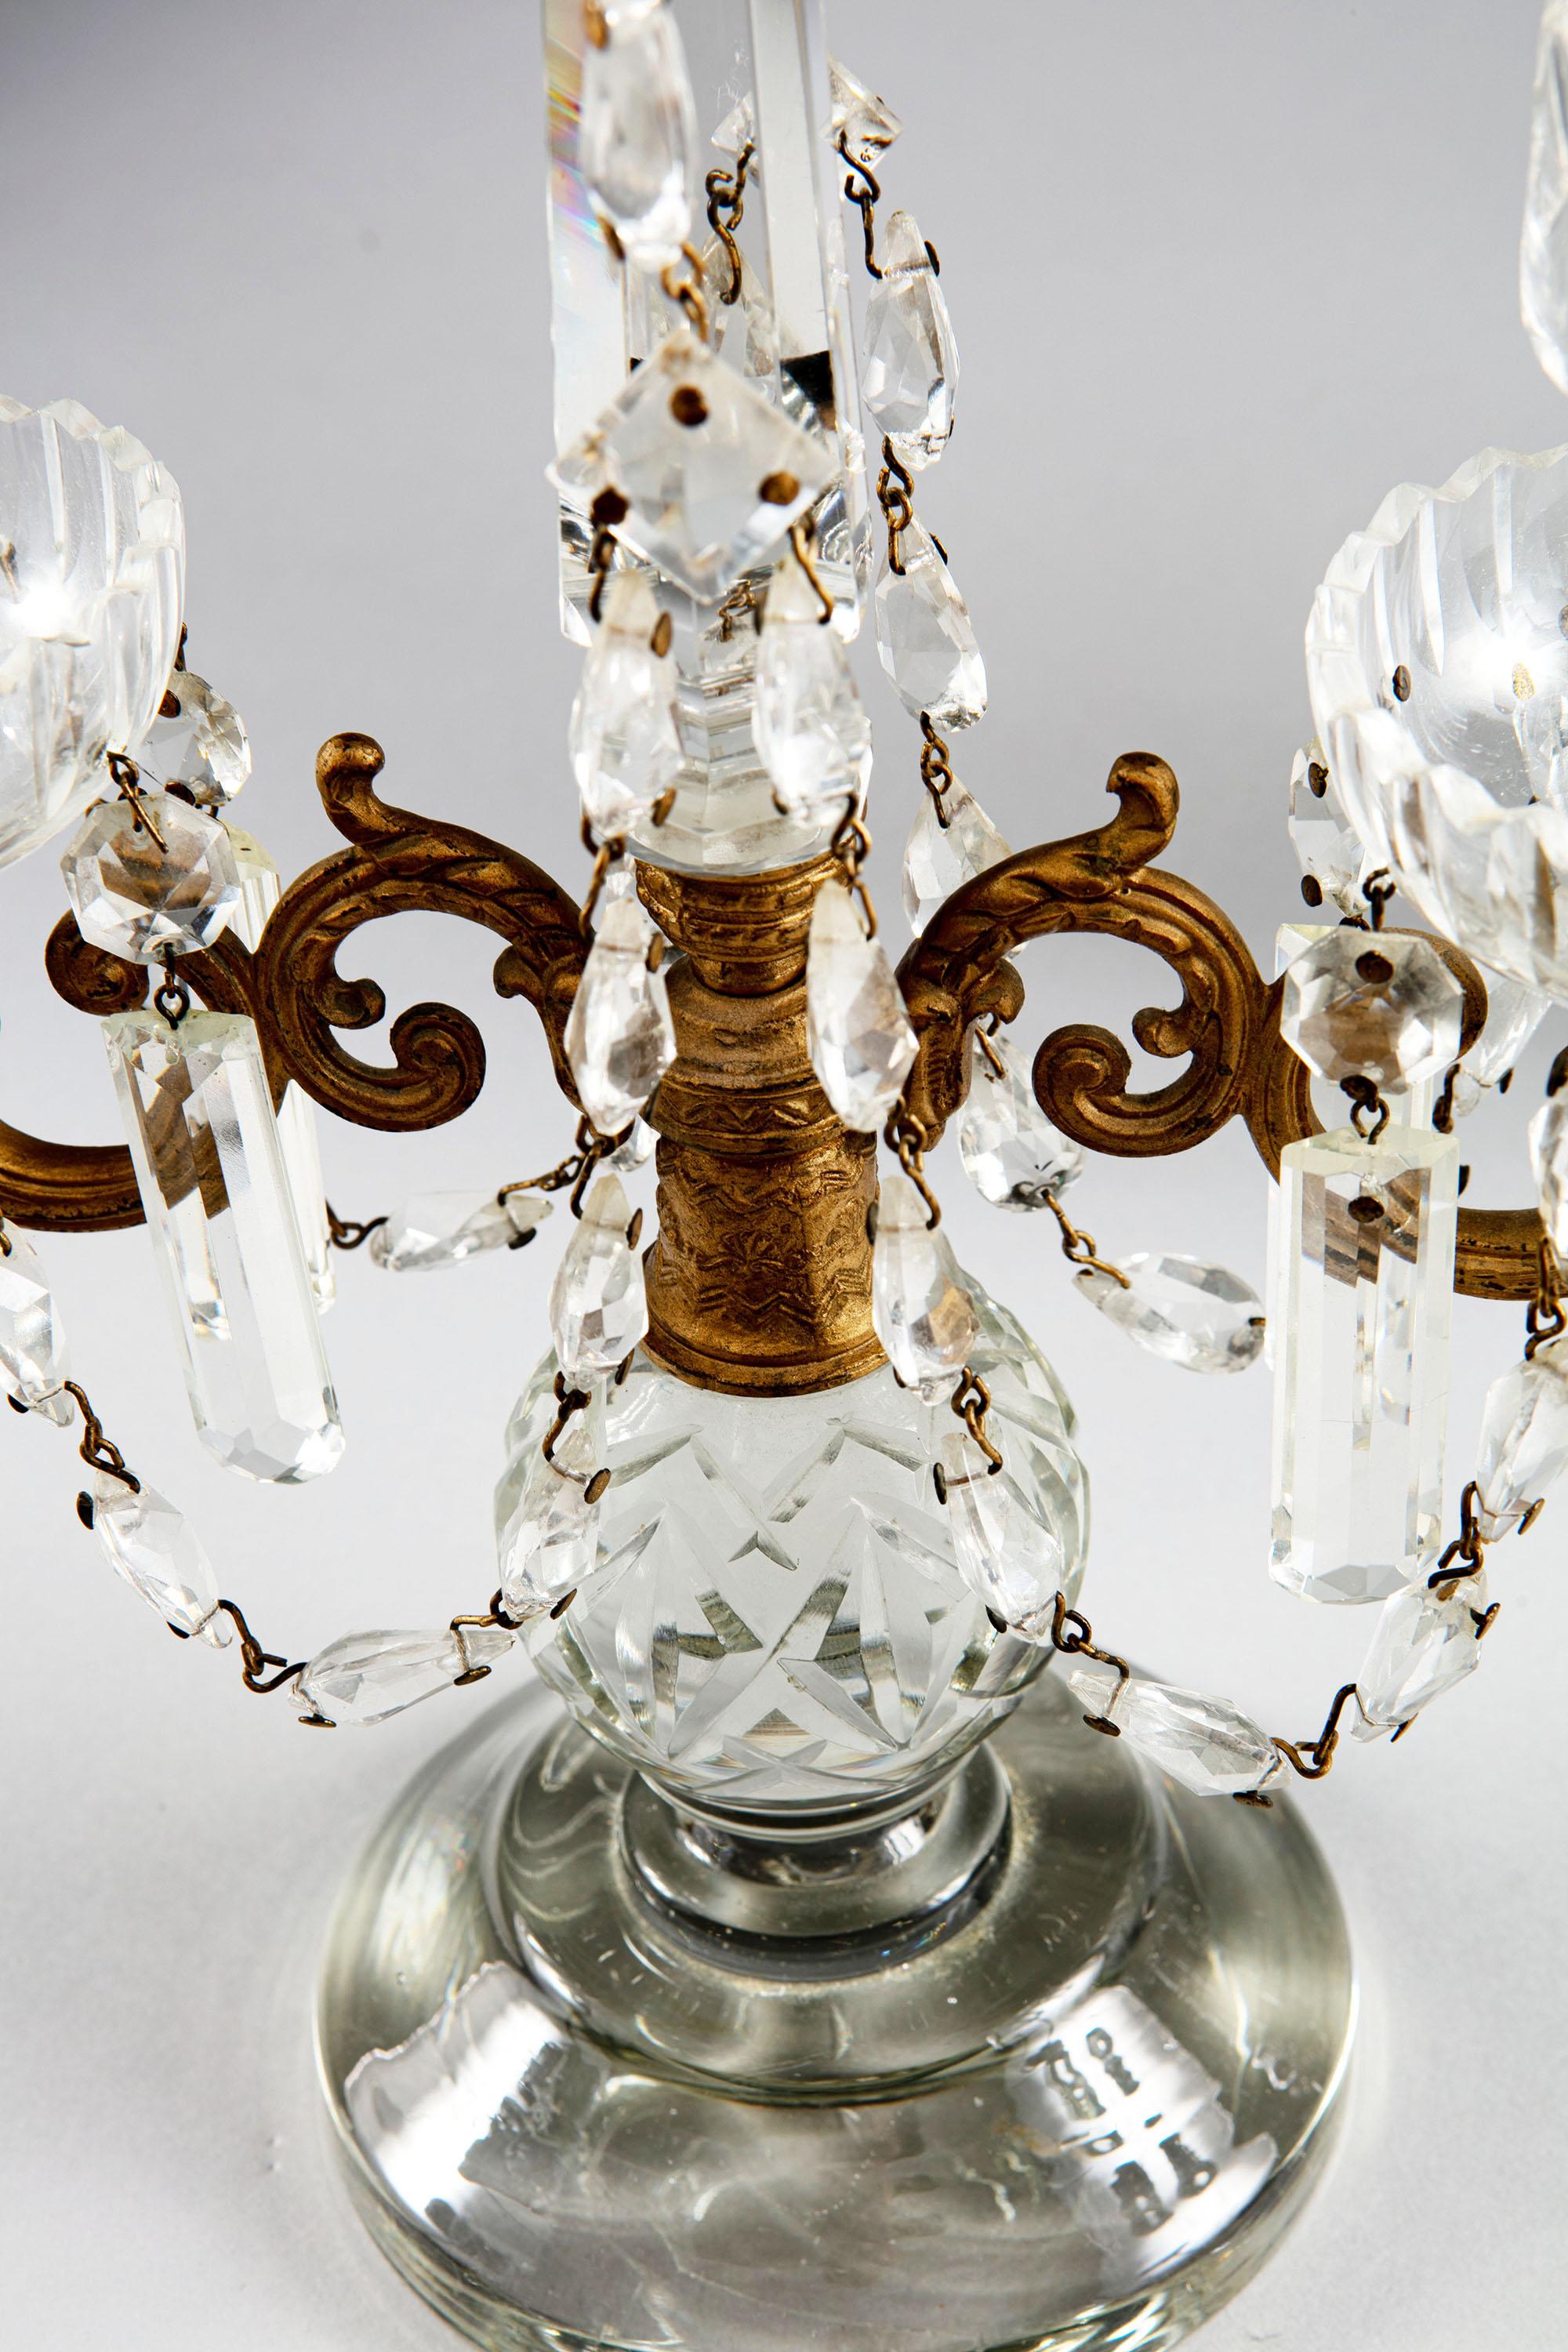 19th Century Pair of Tall Cut Glass and Gilt Metal Table Lustres Candelabra In Fair Condition In London, by appointment only